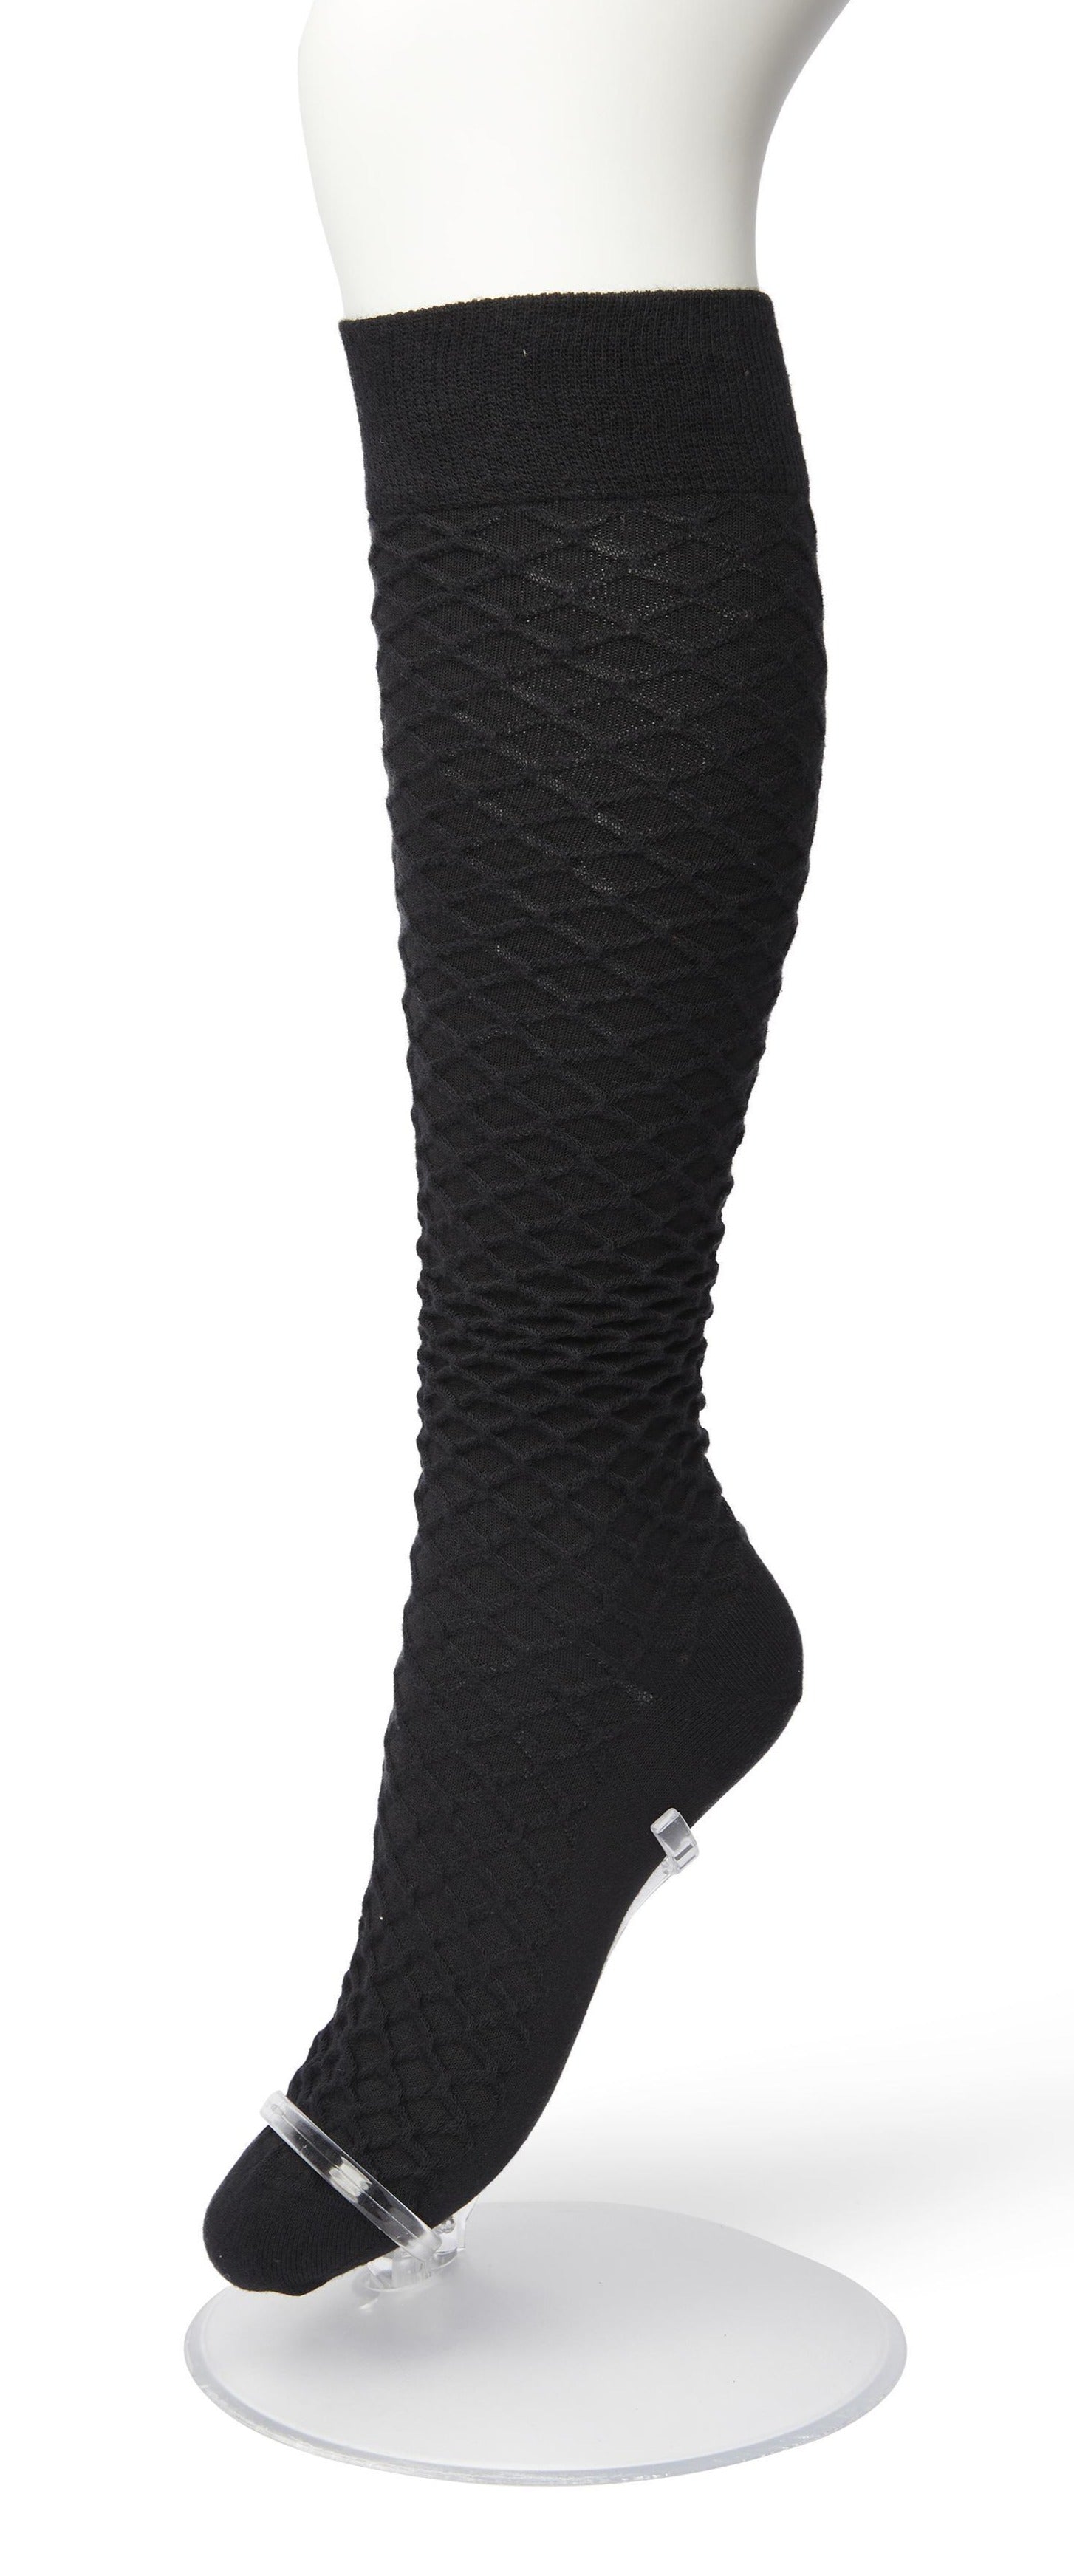 Bonnie Doon BP211506 Cable Knee-highs - Black soft and warm knitted knee-high socks with a criss-cross diamond textured pattern